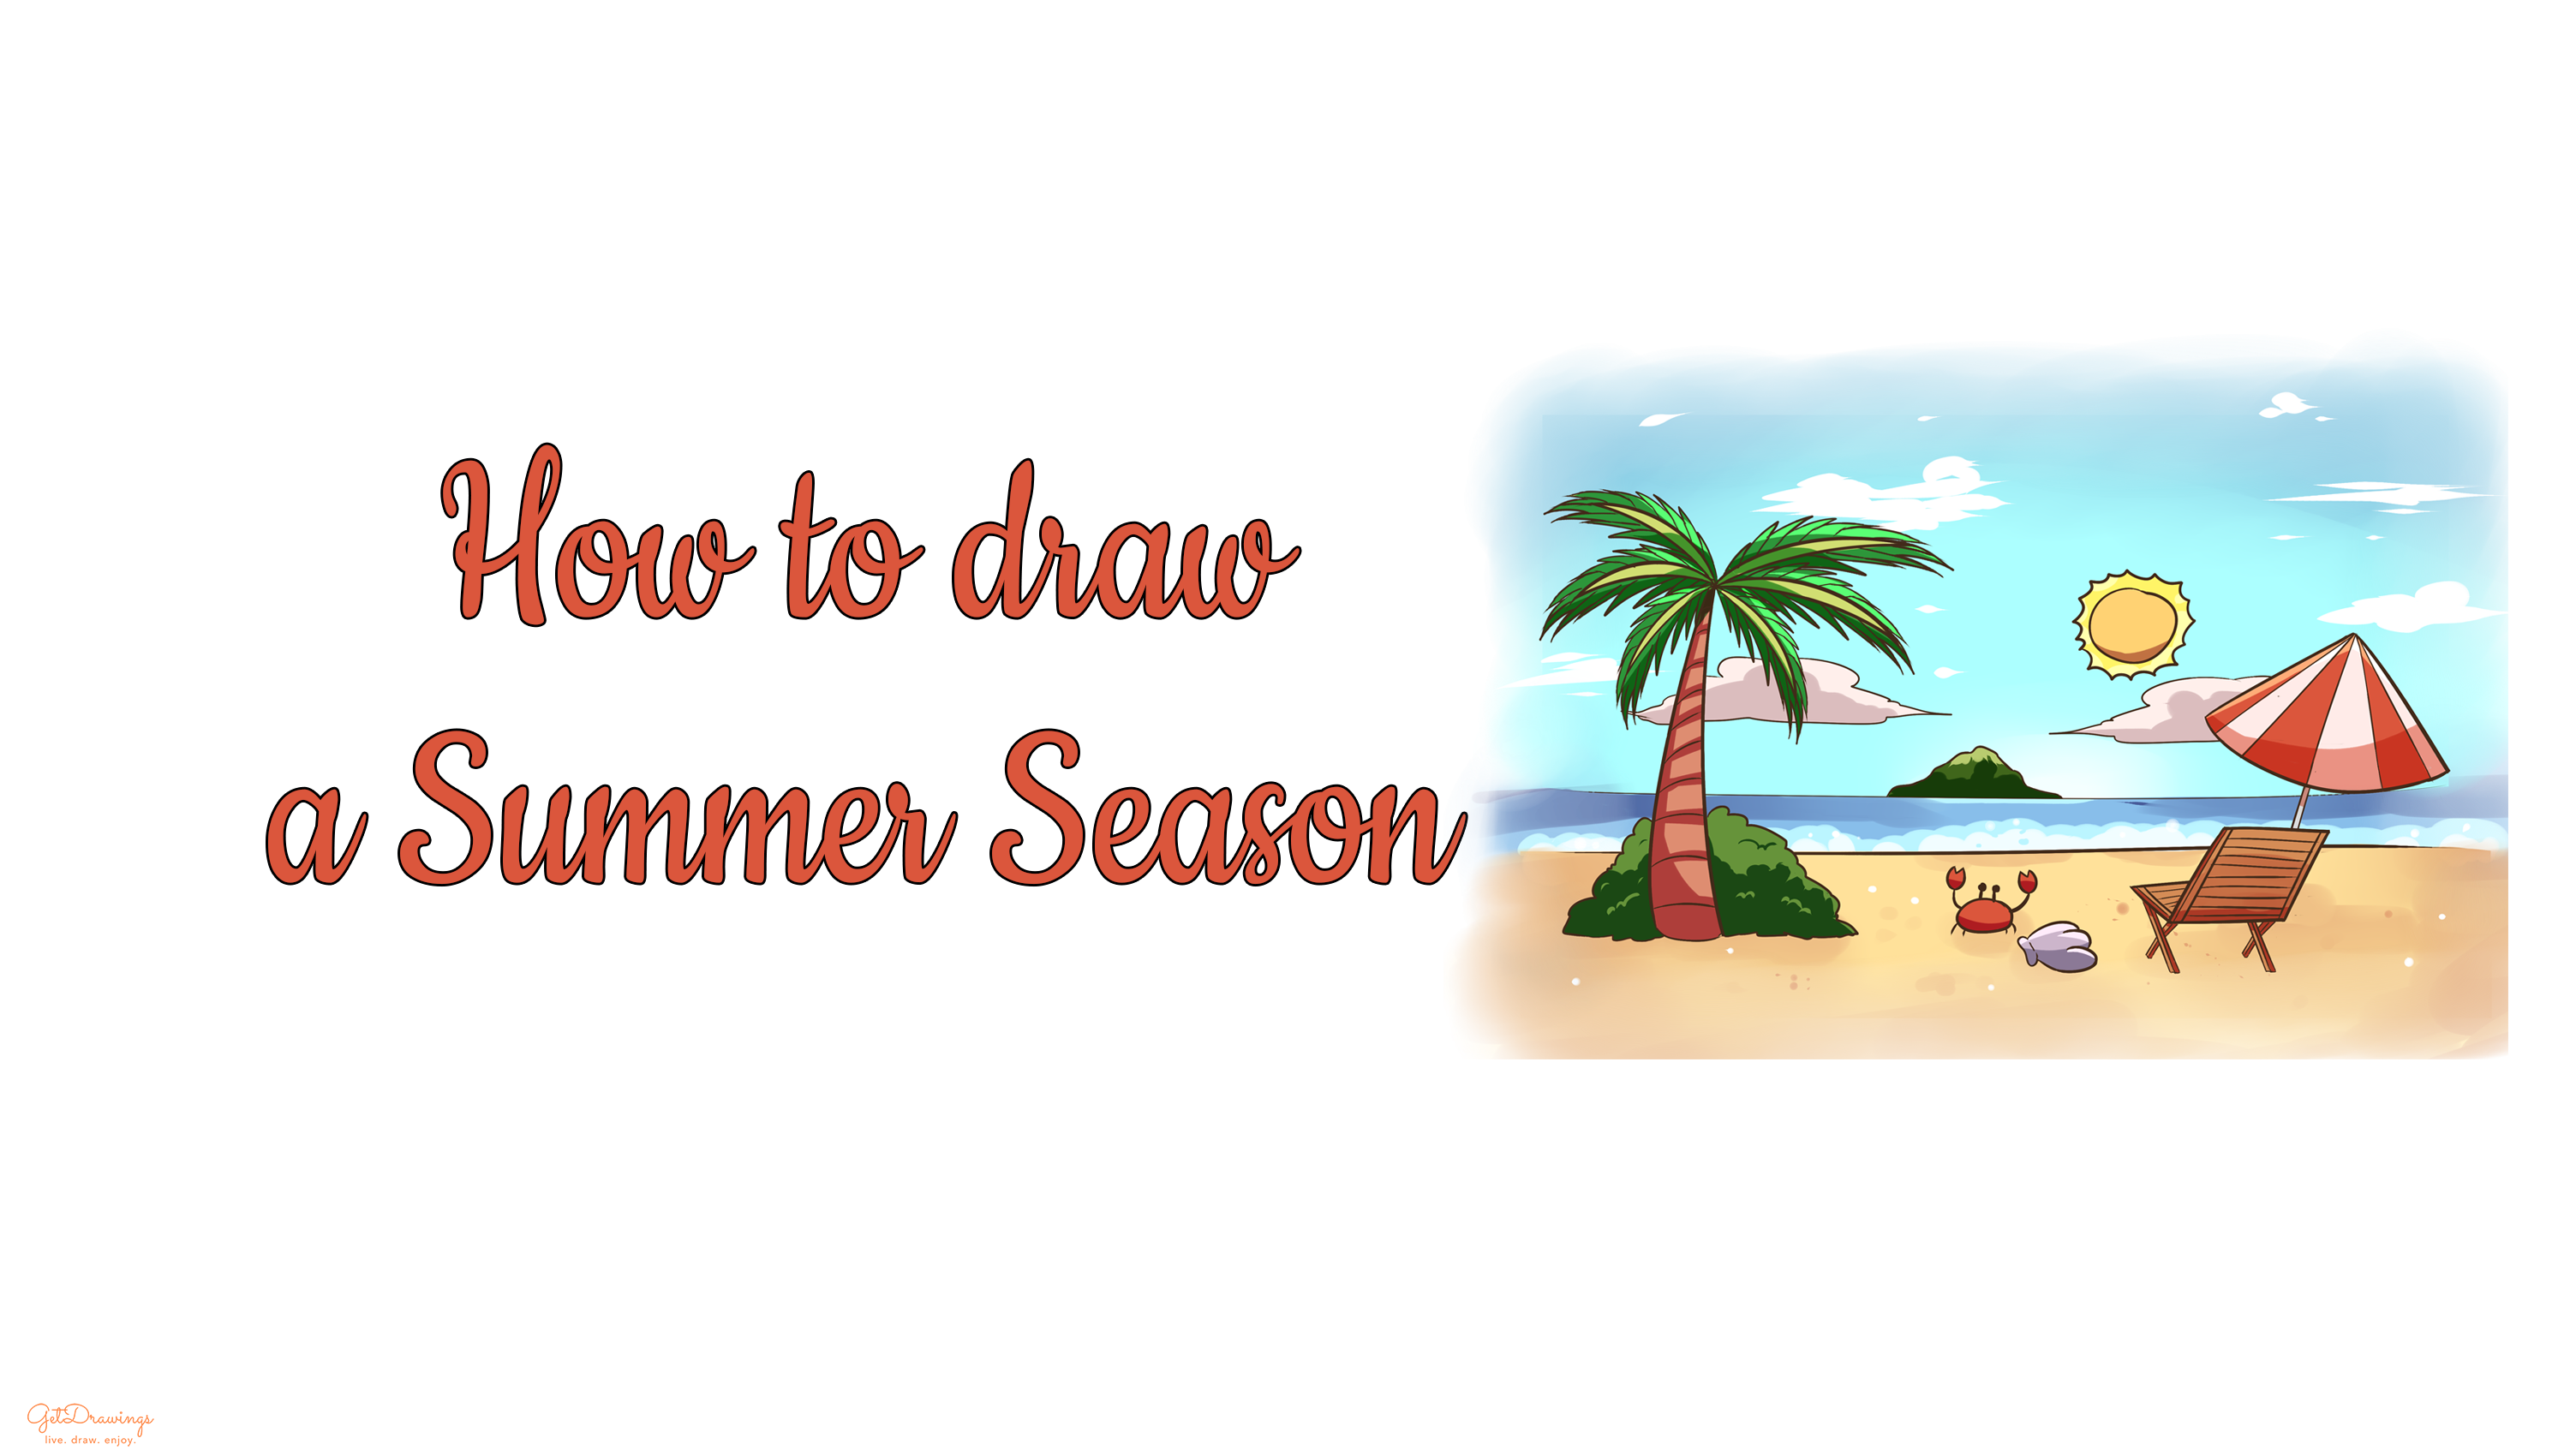 How to draw a Summer Season?